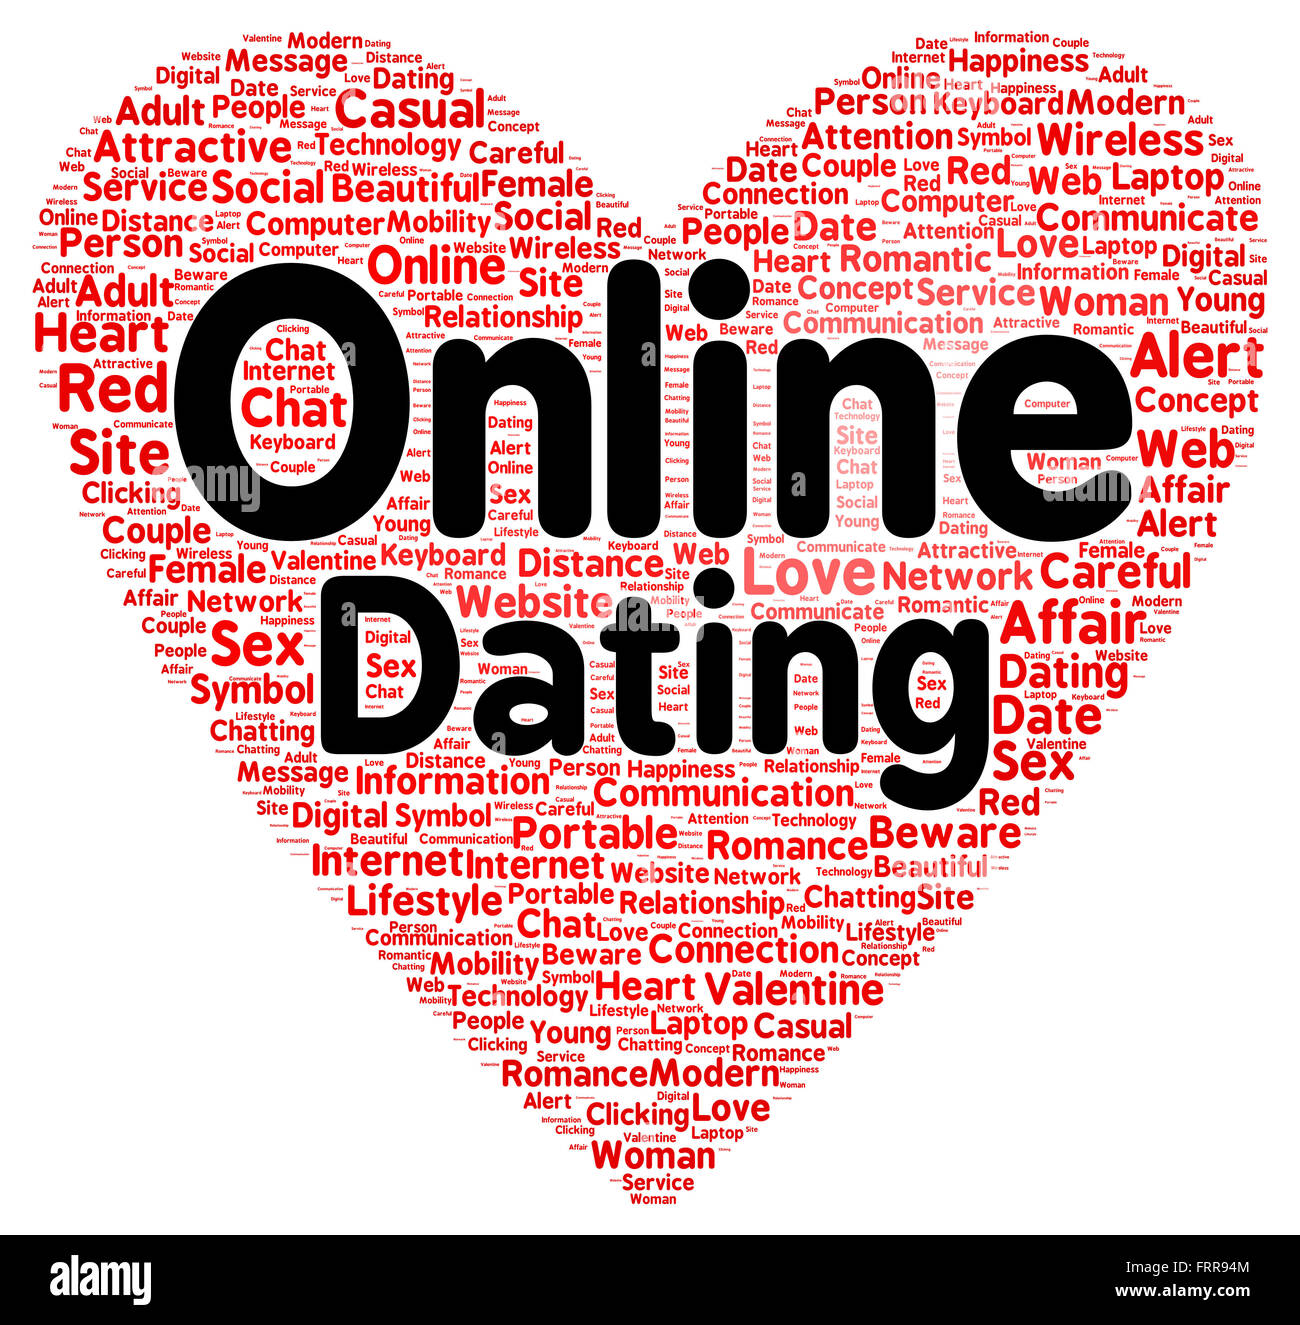 Online dating word cloud shape concept Stock Photo